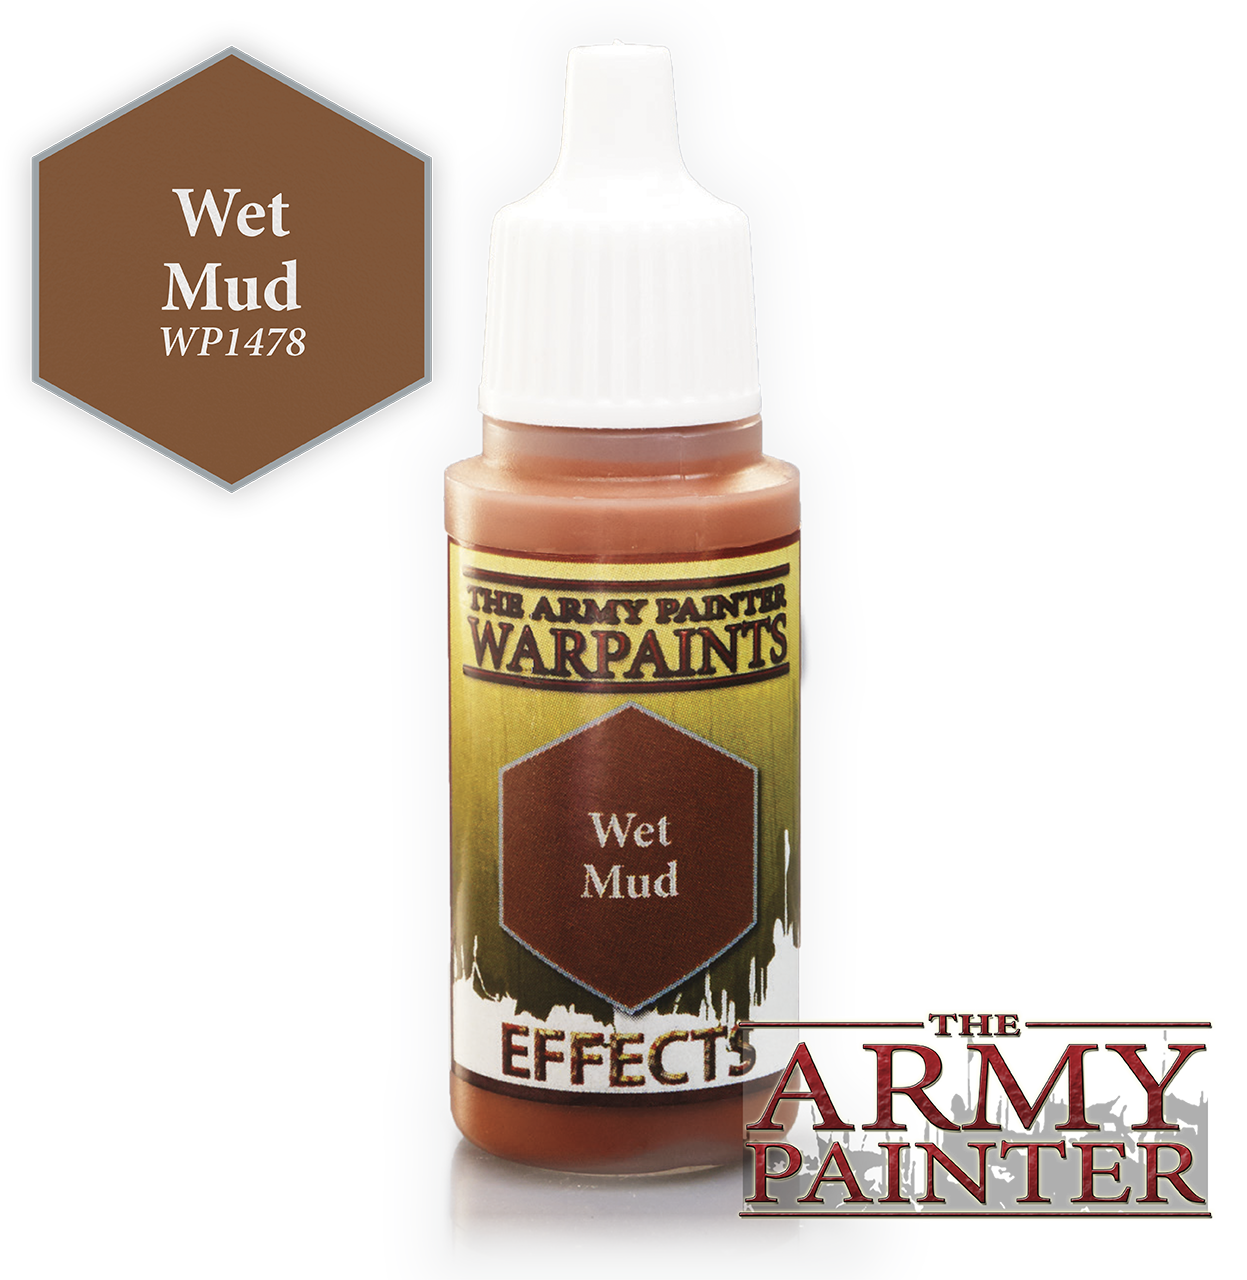 The ARMY PAINTER: Effects Warpaints - Wet Mud | Tacoma Games